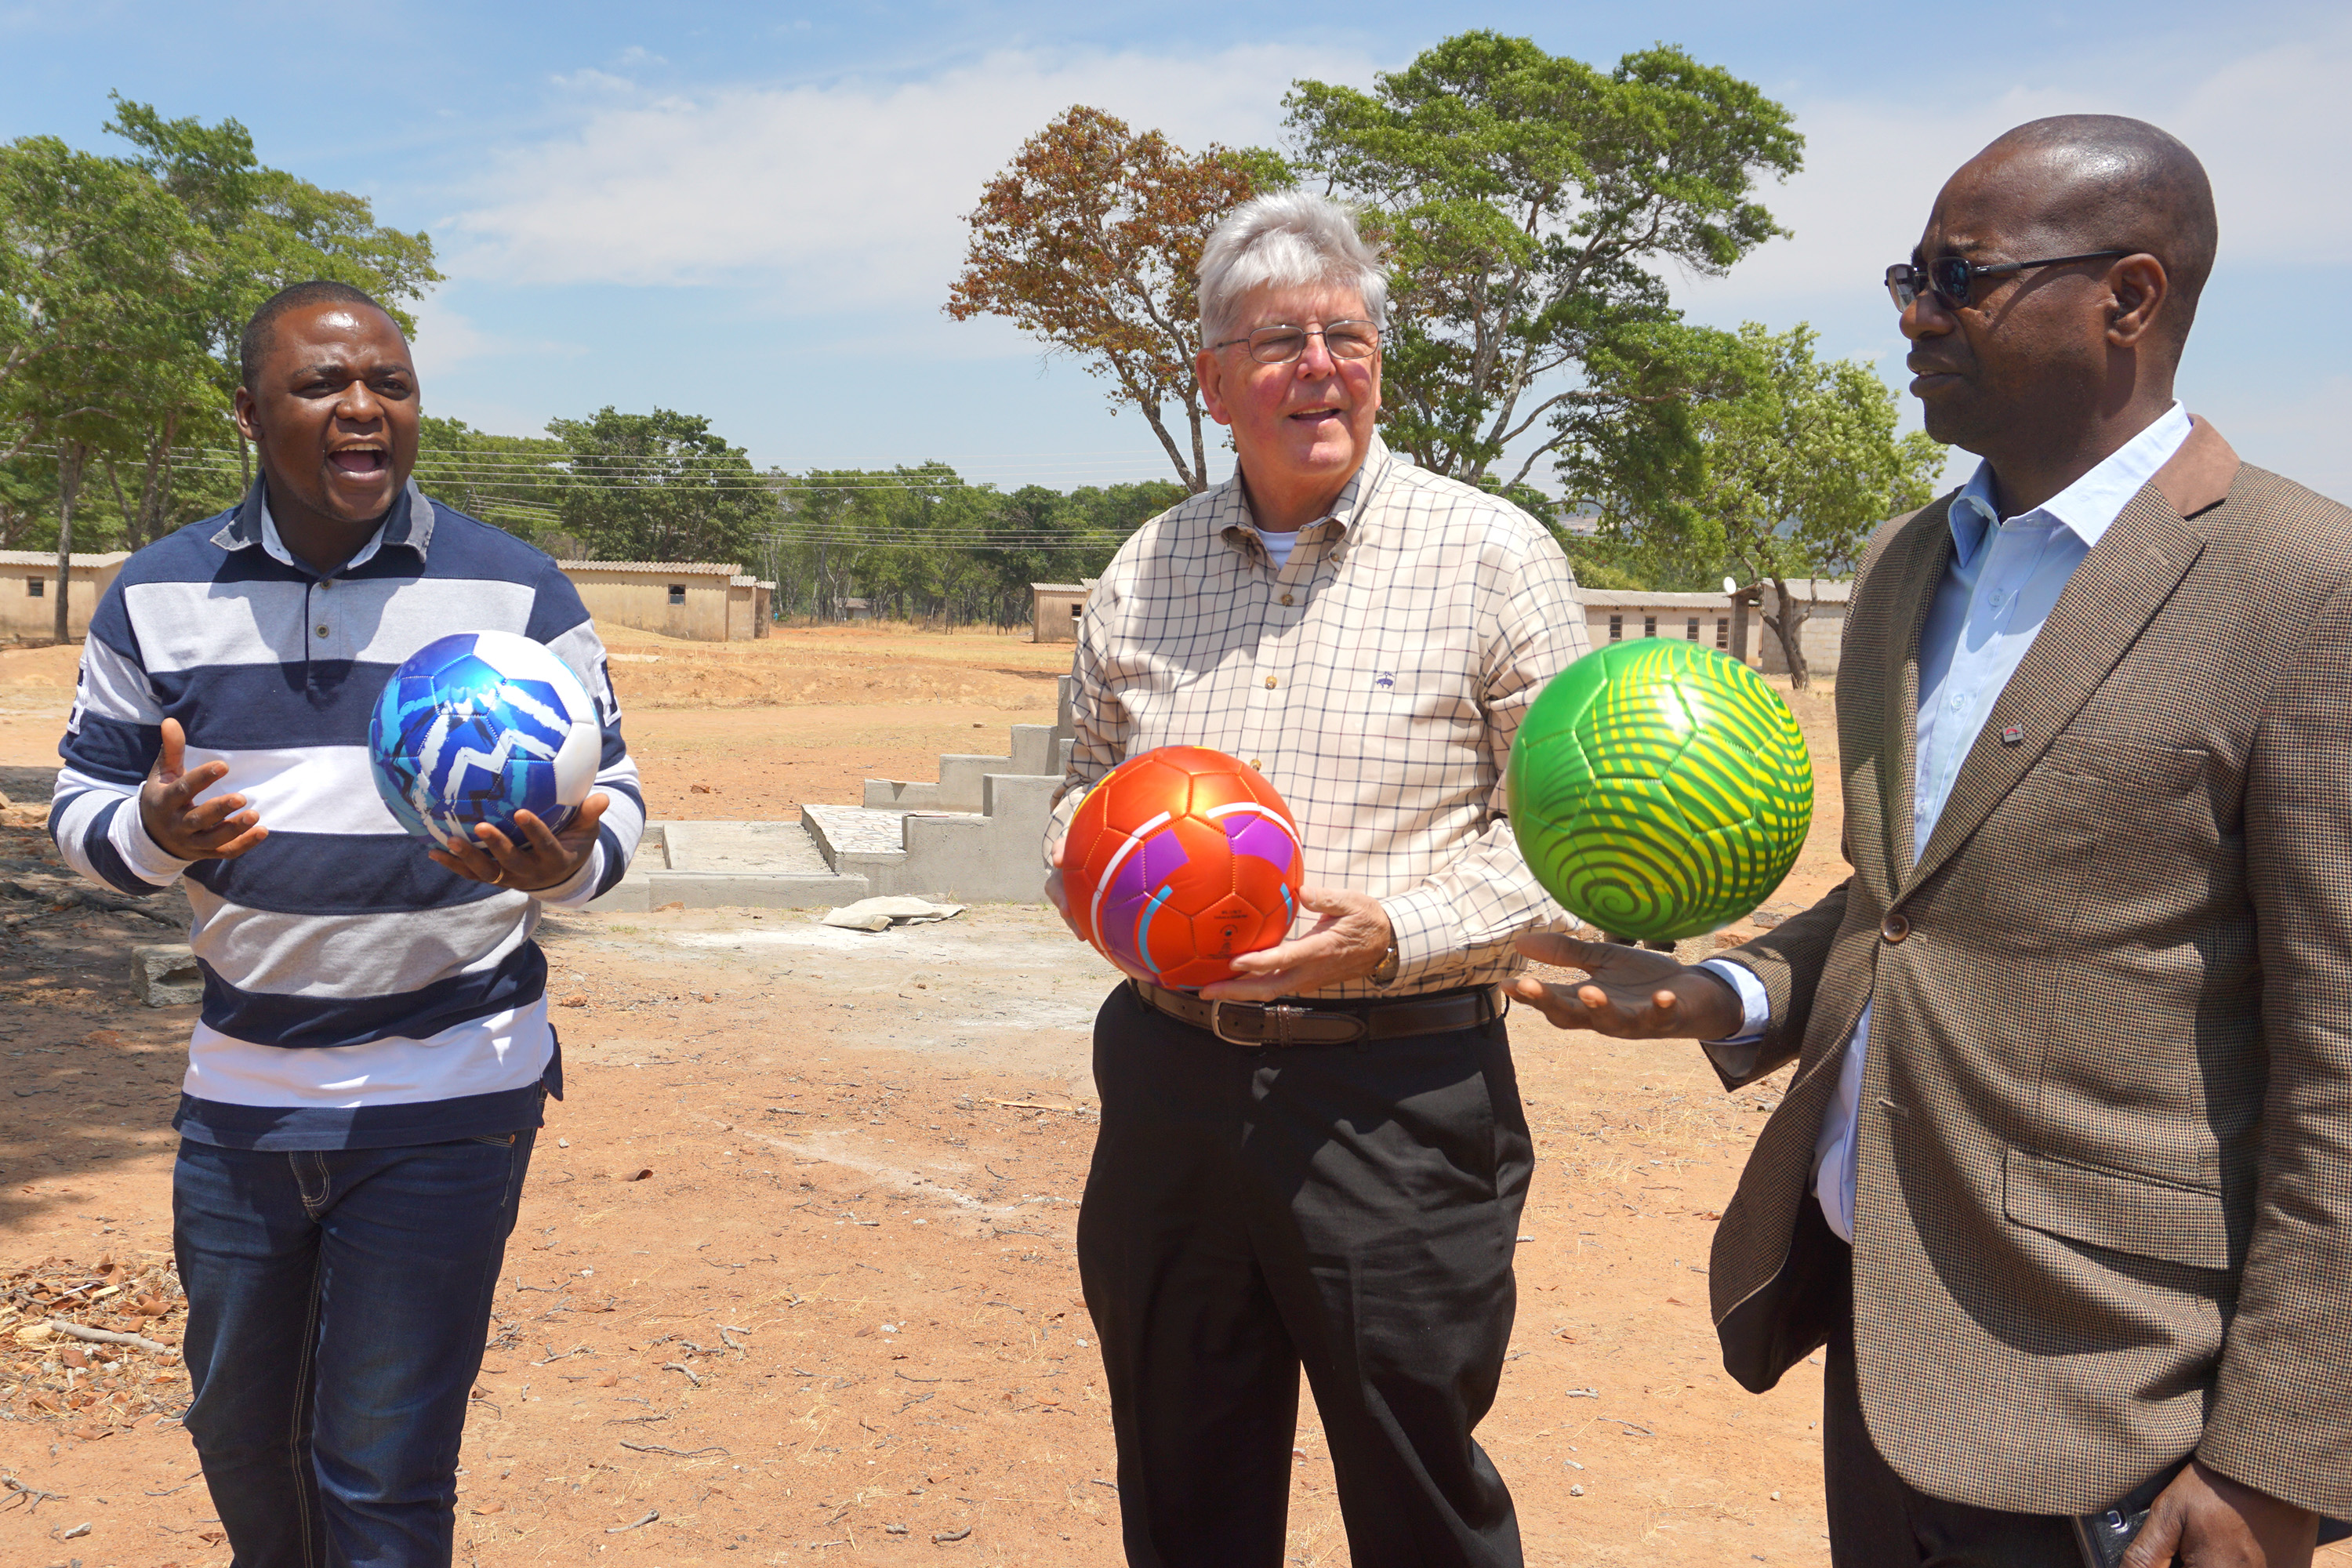 The Rev. Future Sibanda, left, Charlie Moore and the Rev. Henry Luckson Chareka hold soccer balls donated to students at Hanwa Mission School in the Murewa District of Zimbawe as part of a partnership between Community United Methodist Church in Crofton, Maryland, and United Methodists in the Zimbabwe West Conference. Photo by Chenayi Kumuterera, UMNS.